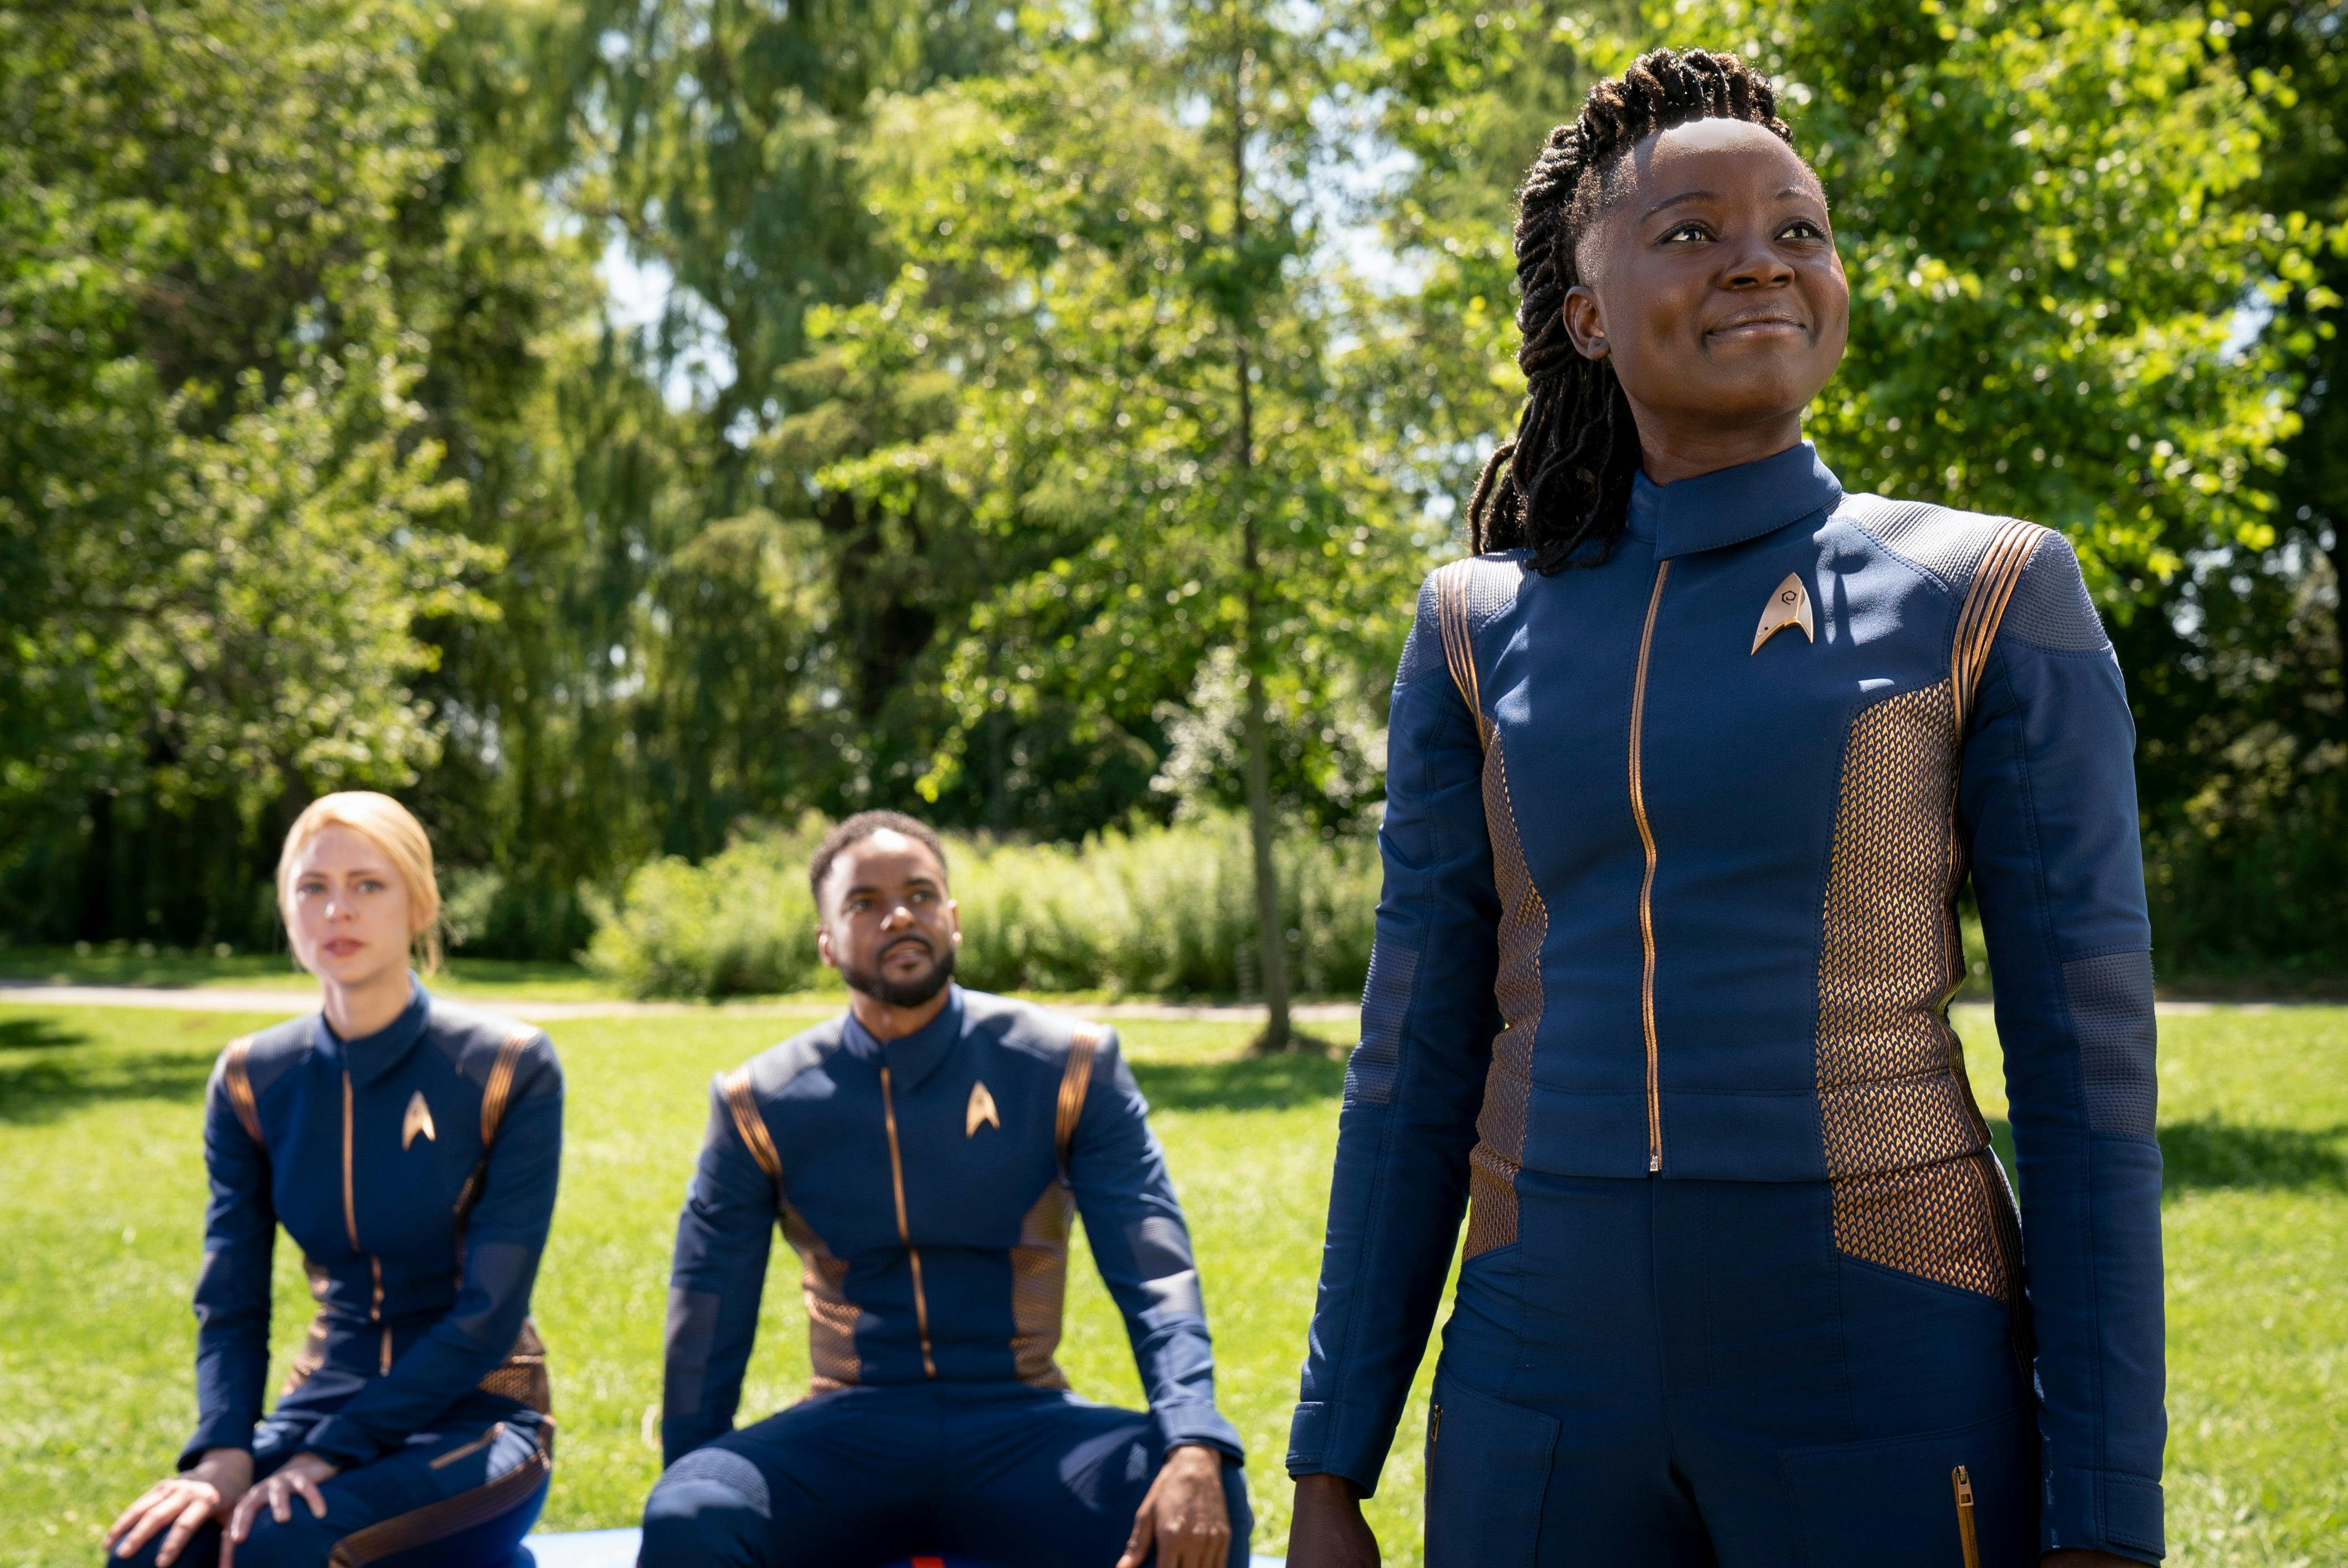 Star Trek: Discovery: - "People Of Earth"